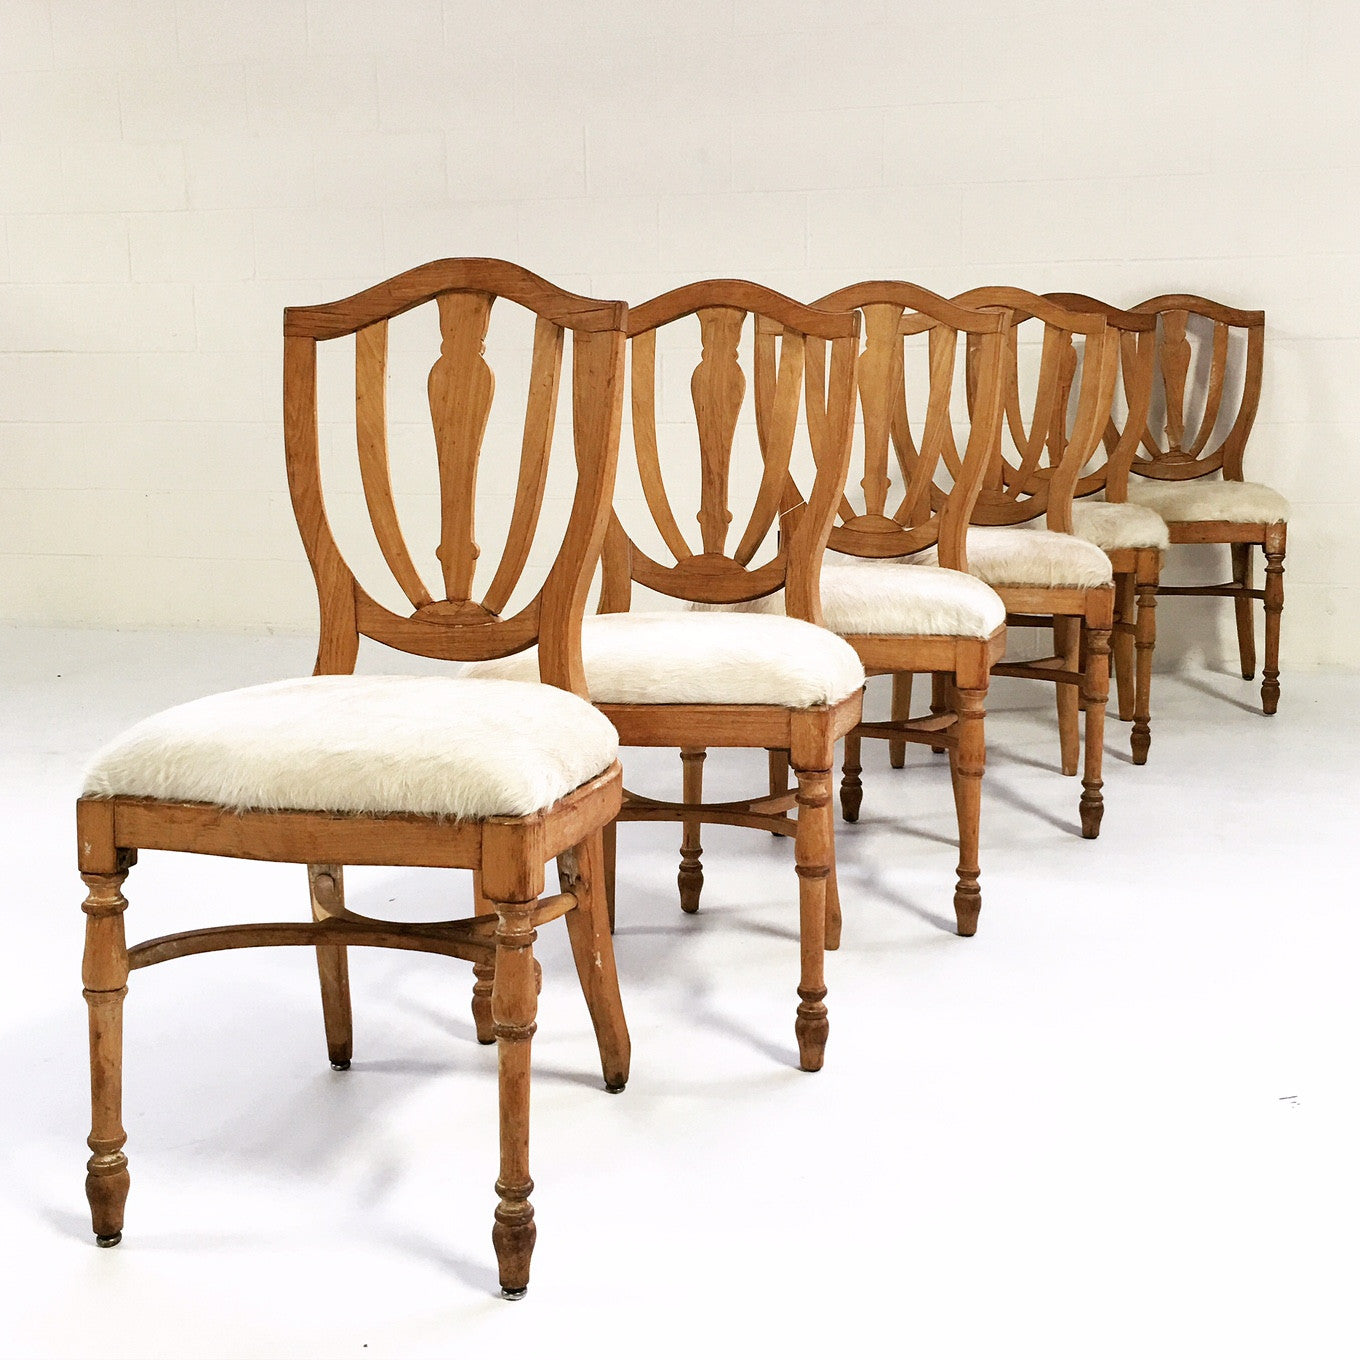 Maple Dining Chairs in Brazilian Cowhide, set of 6 - FORSYTH